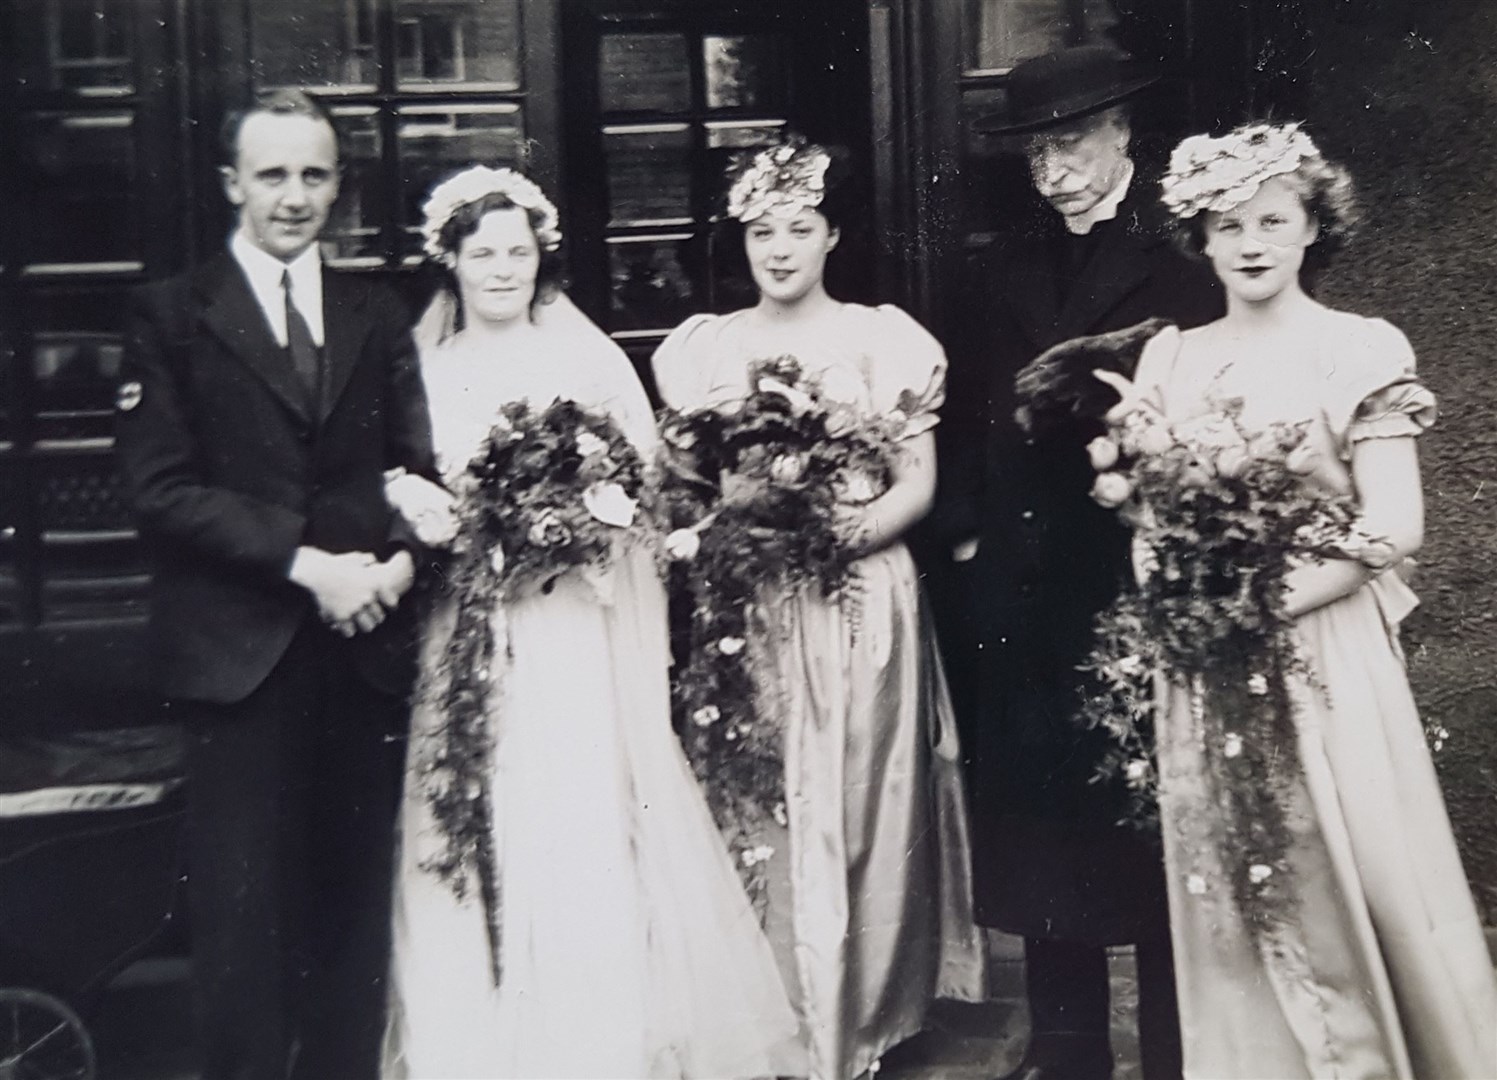 Isobel as married to Stanley Roy Harling on April 26, 1946 by Rev. D. Macfarlene. D.D. Minister of the Church of Scotland, Kingussie.